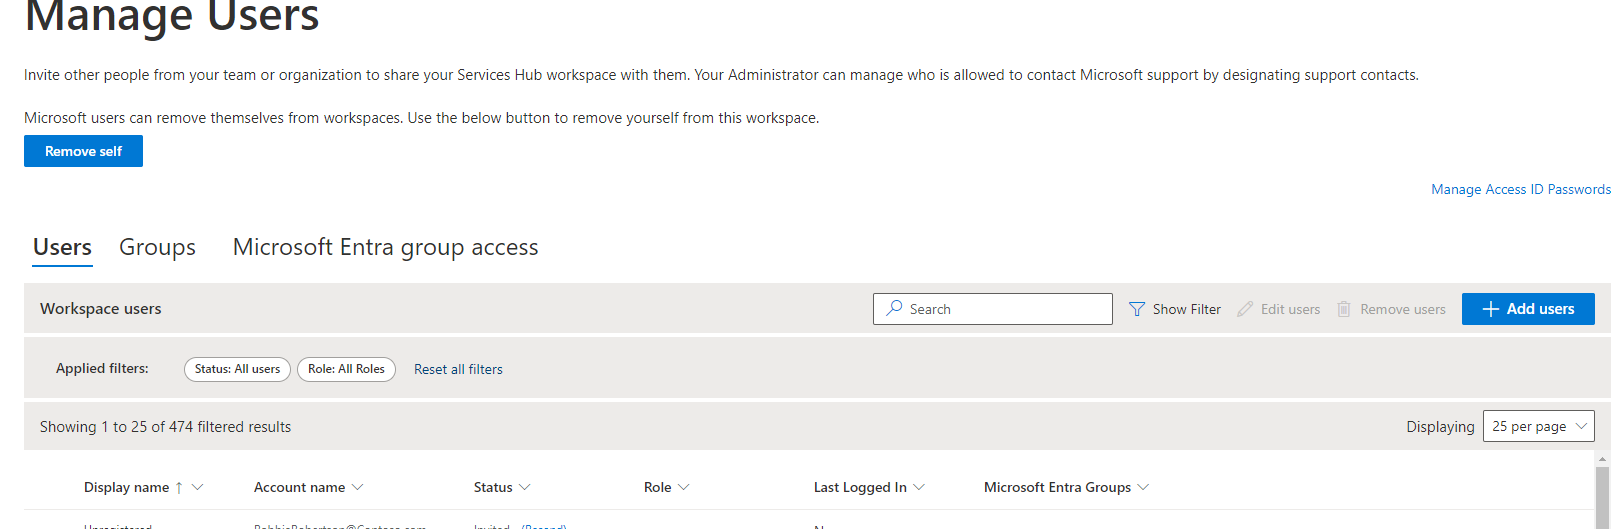 Image of the Manage users page.